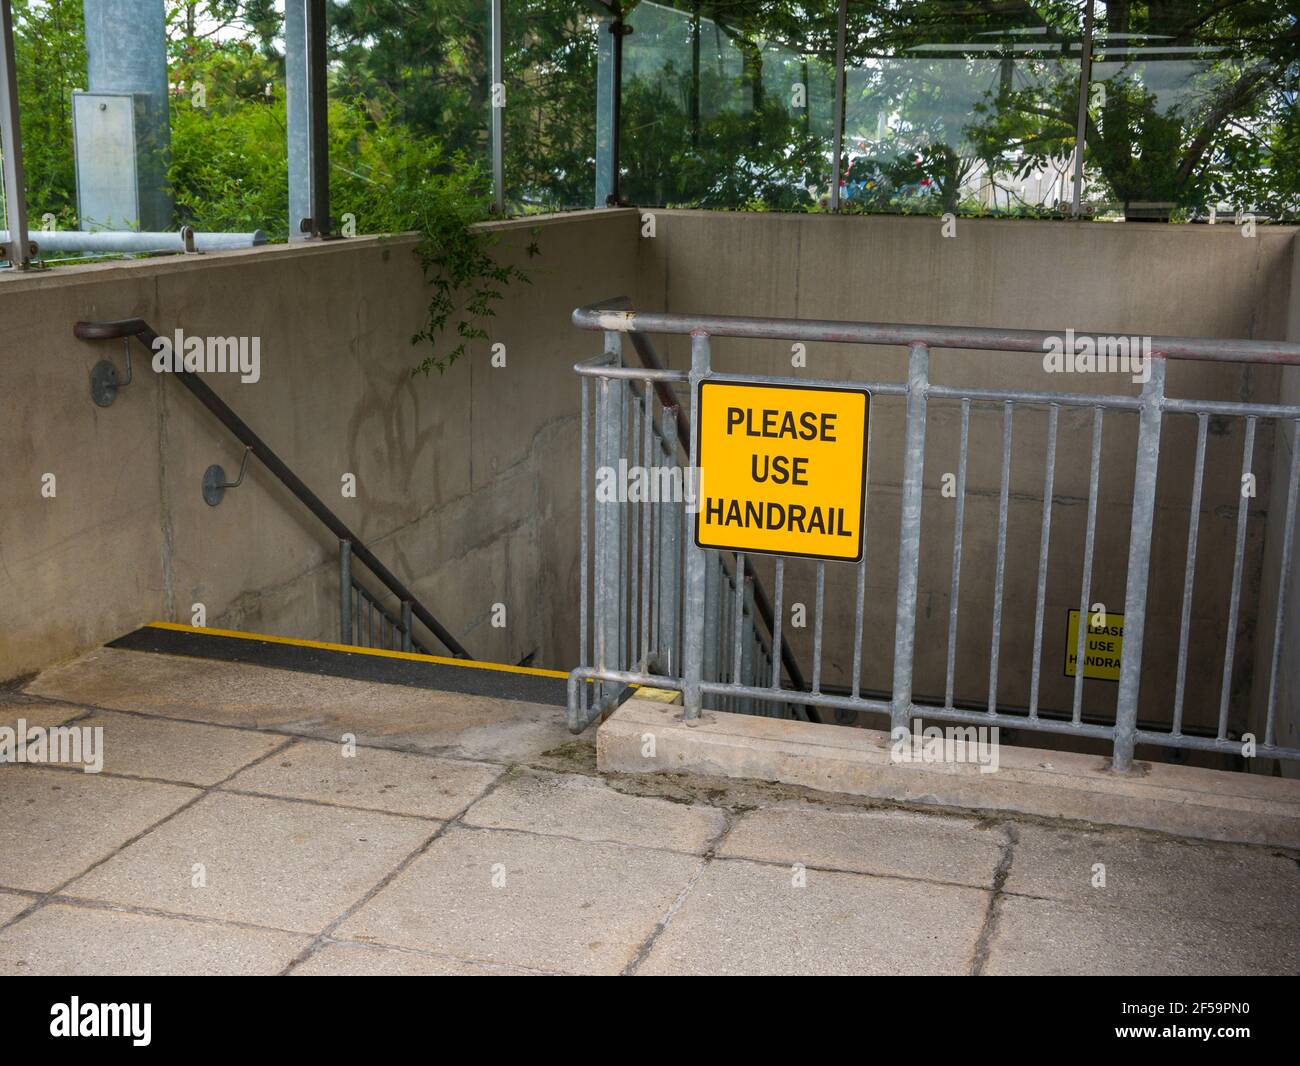 A Please Use Handrail sign on handrails in a stairwell leading to an underground car park at The Mall shopping centre at Cribbs Causeway near Bristol, England. Stock Photo